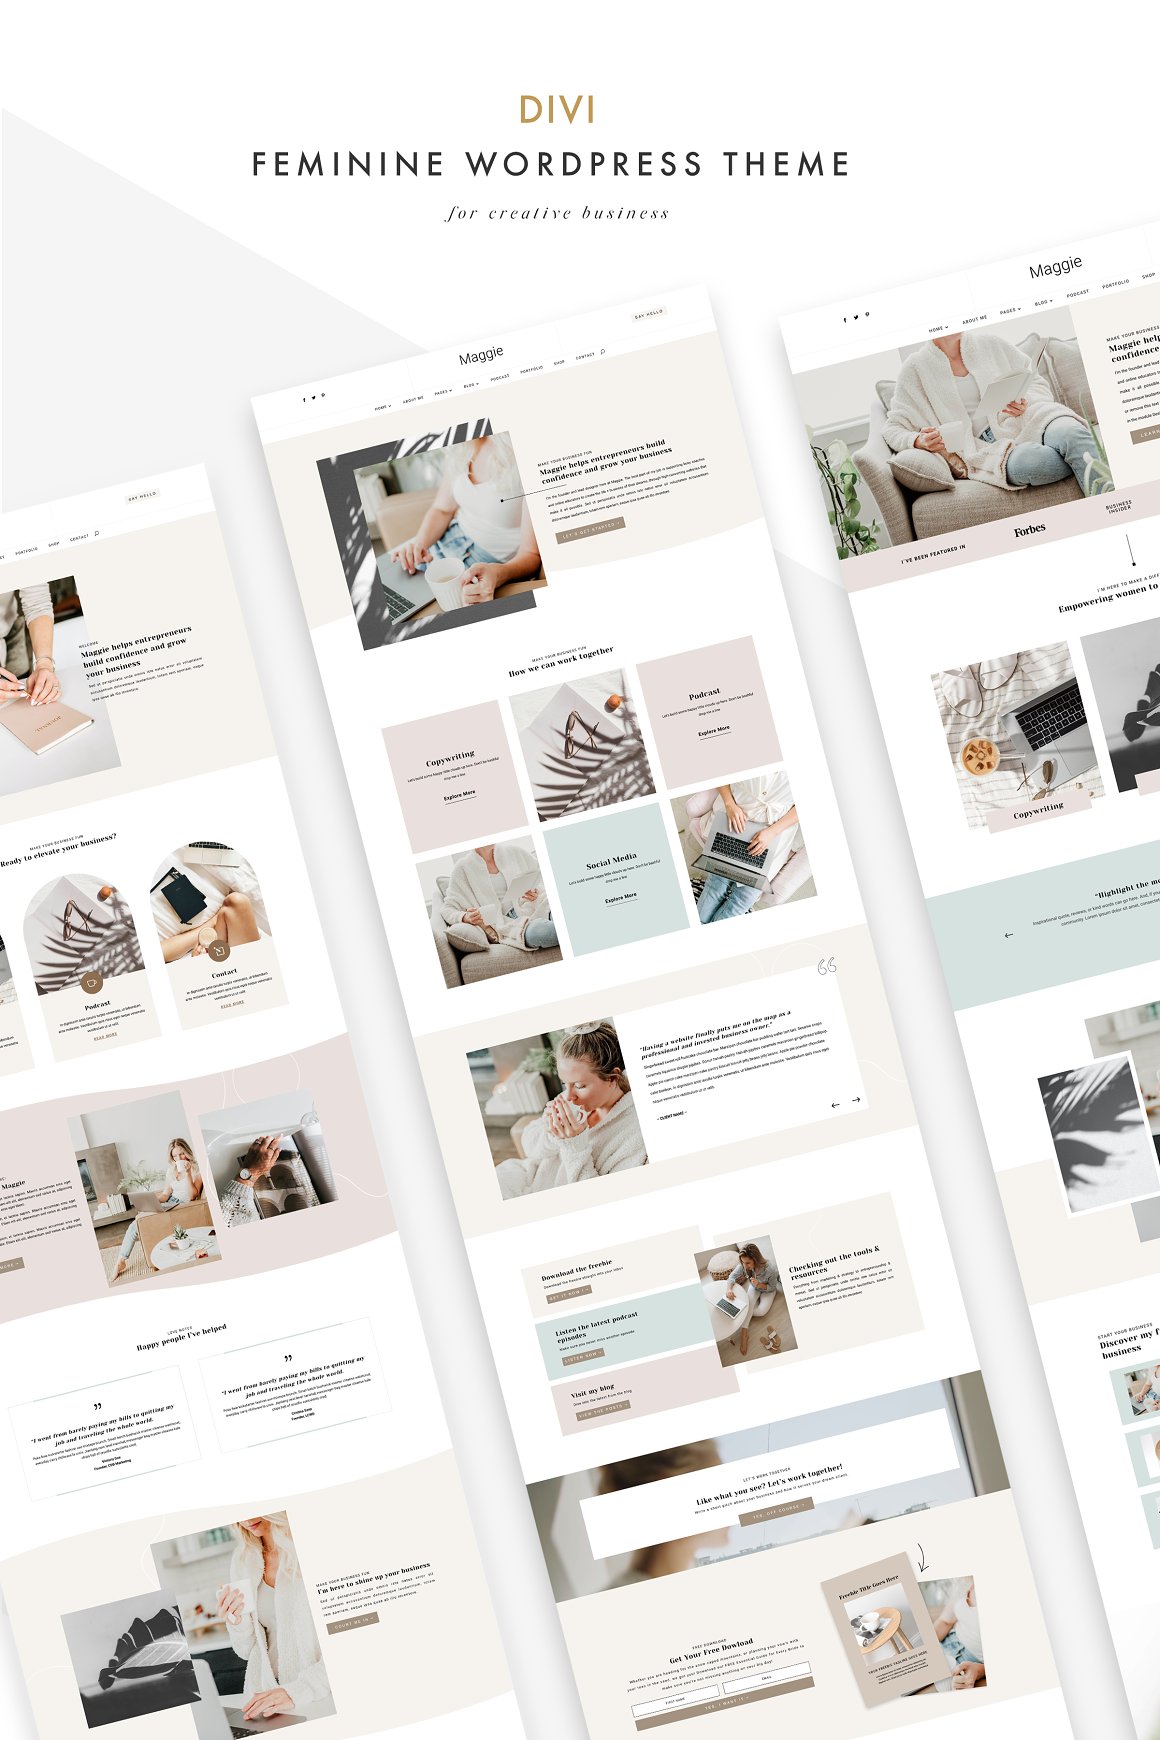 A lot of different divi feminine wordpress theme templates on a gray-white background.